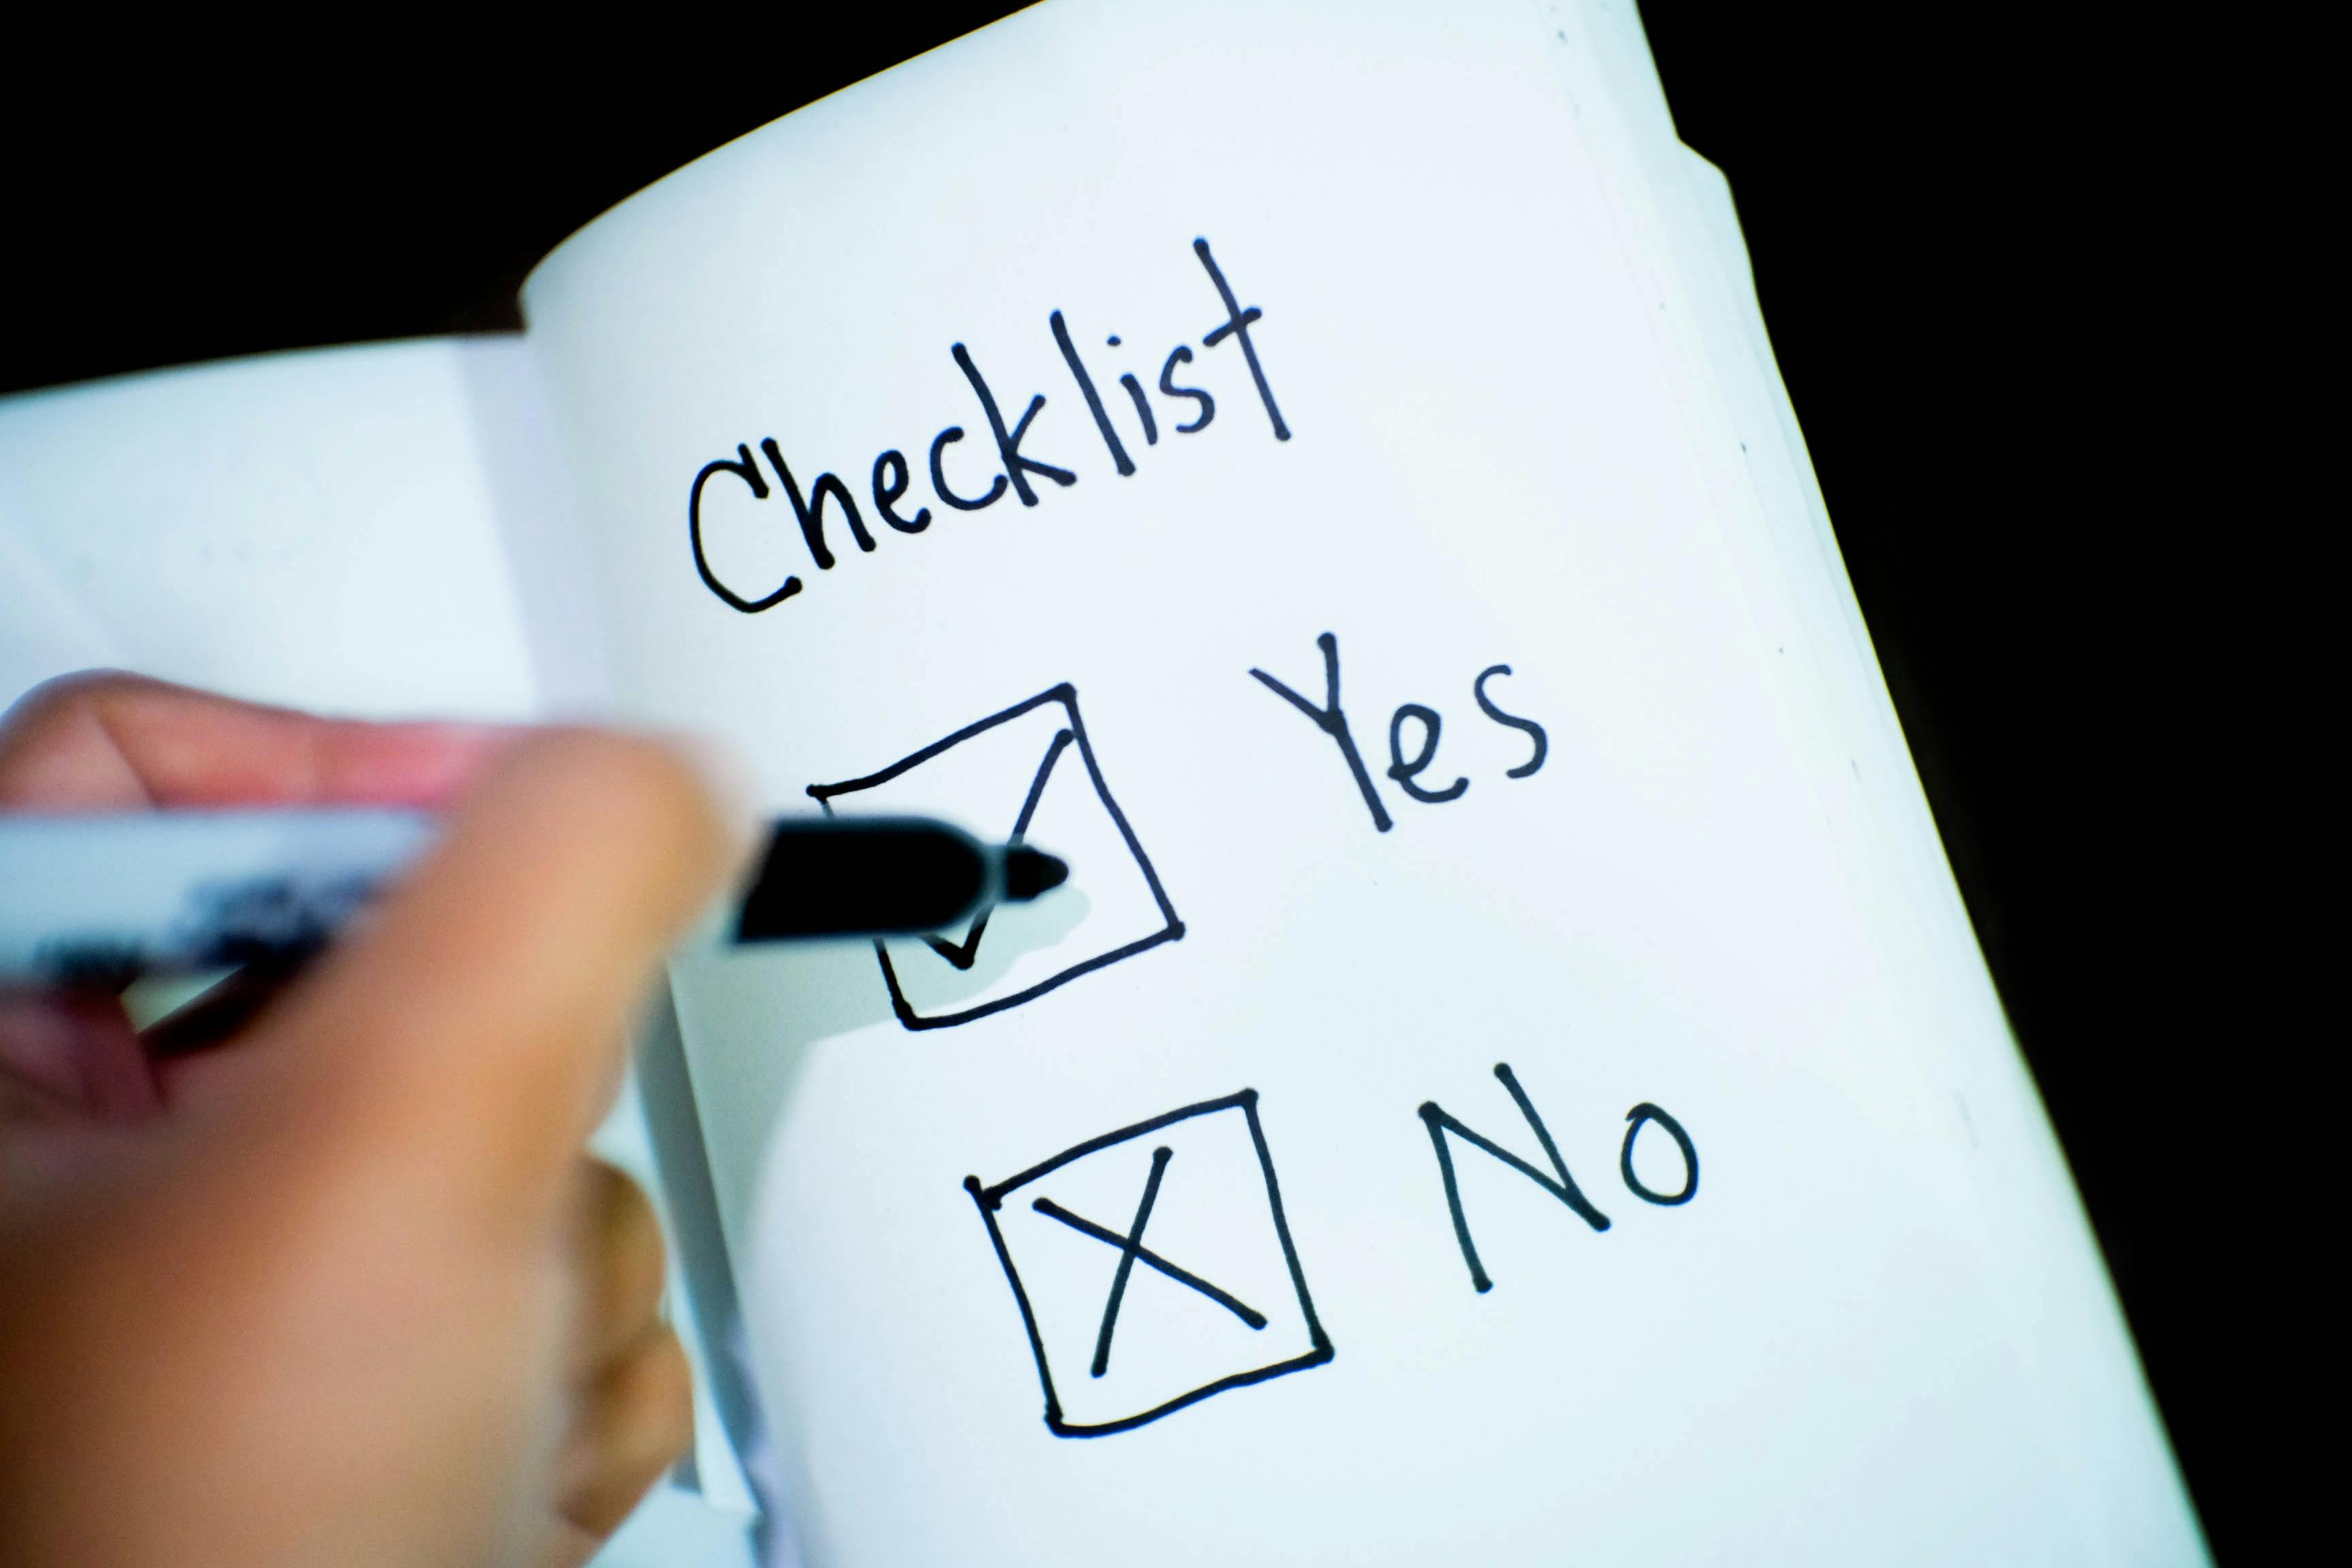 Yes - No Checklist with a check next to yes and x next to no